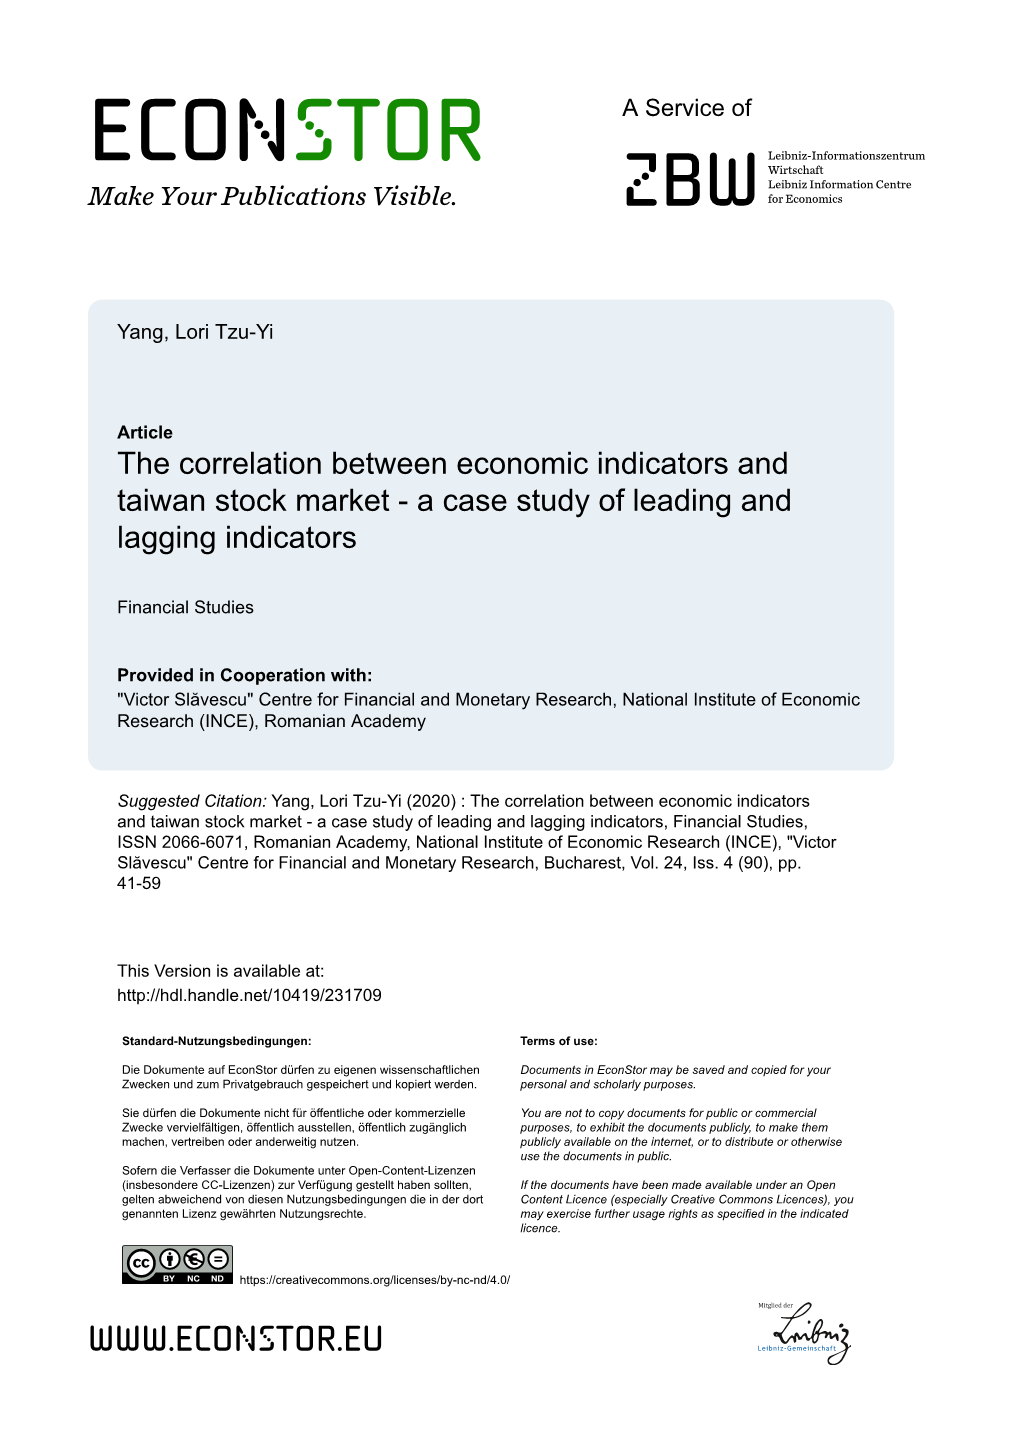 The Correlation Between Economic Indicators and Taiwan Stock Market - a Case Study of Leading and Lagging Indicators